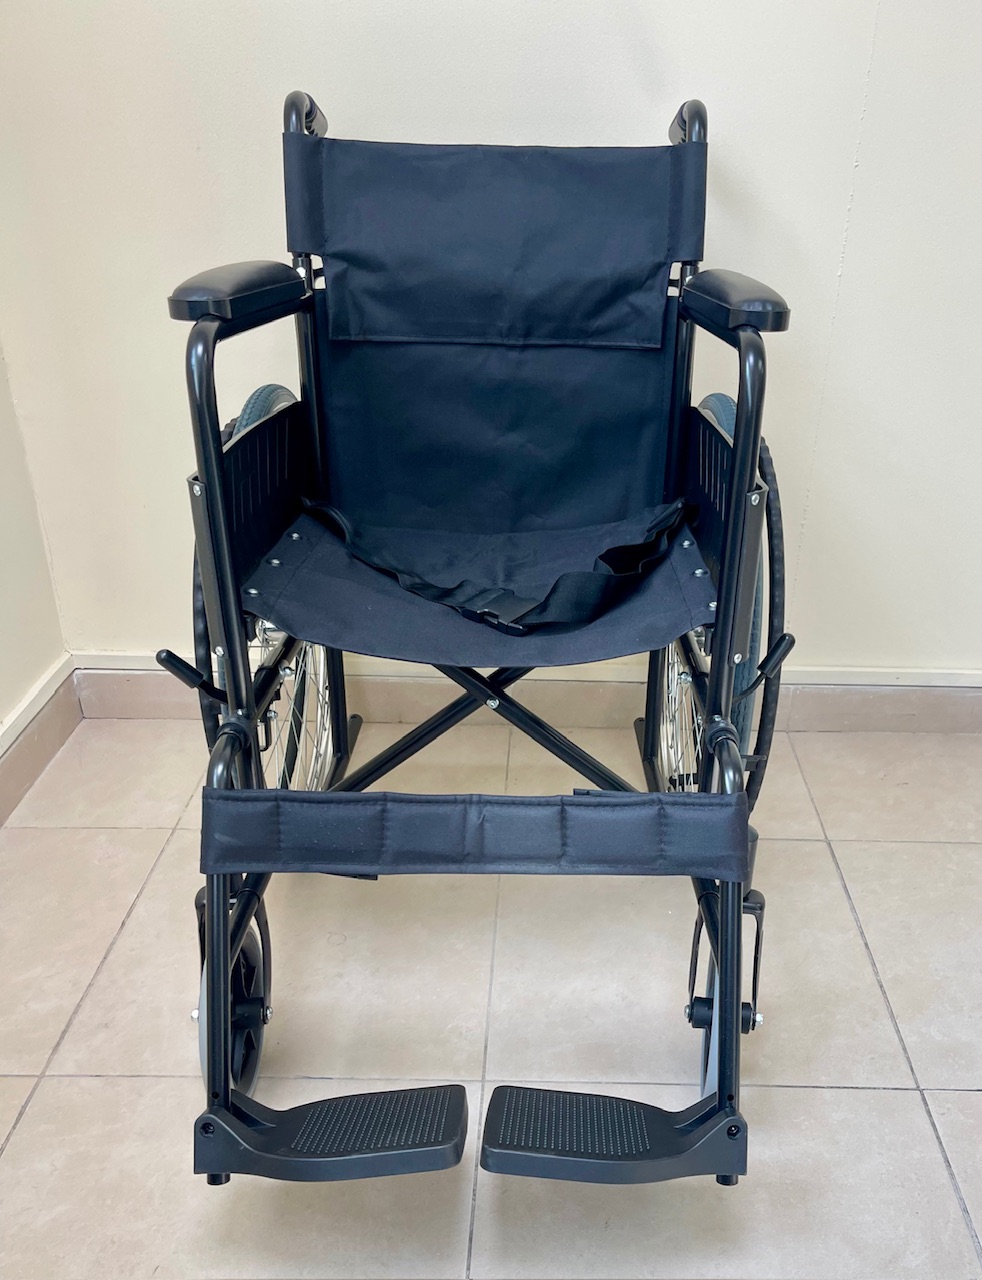 Wheelchair for Sale Used Only Few Times